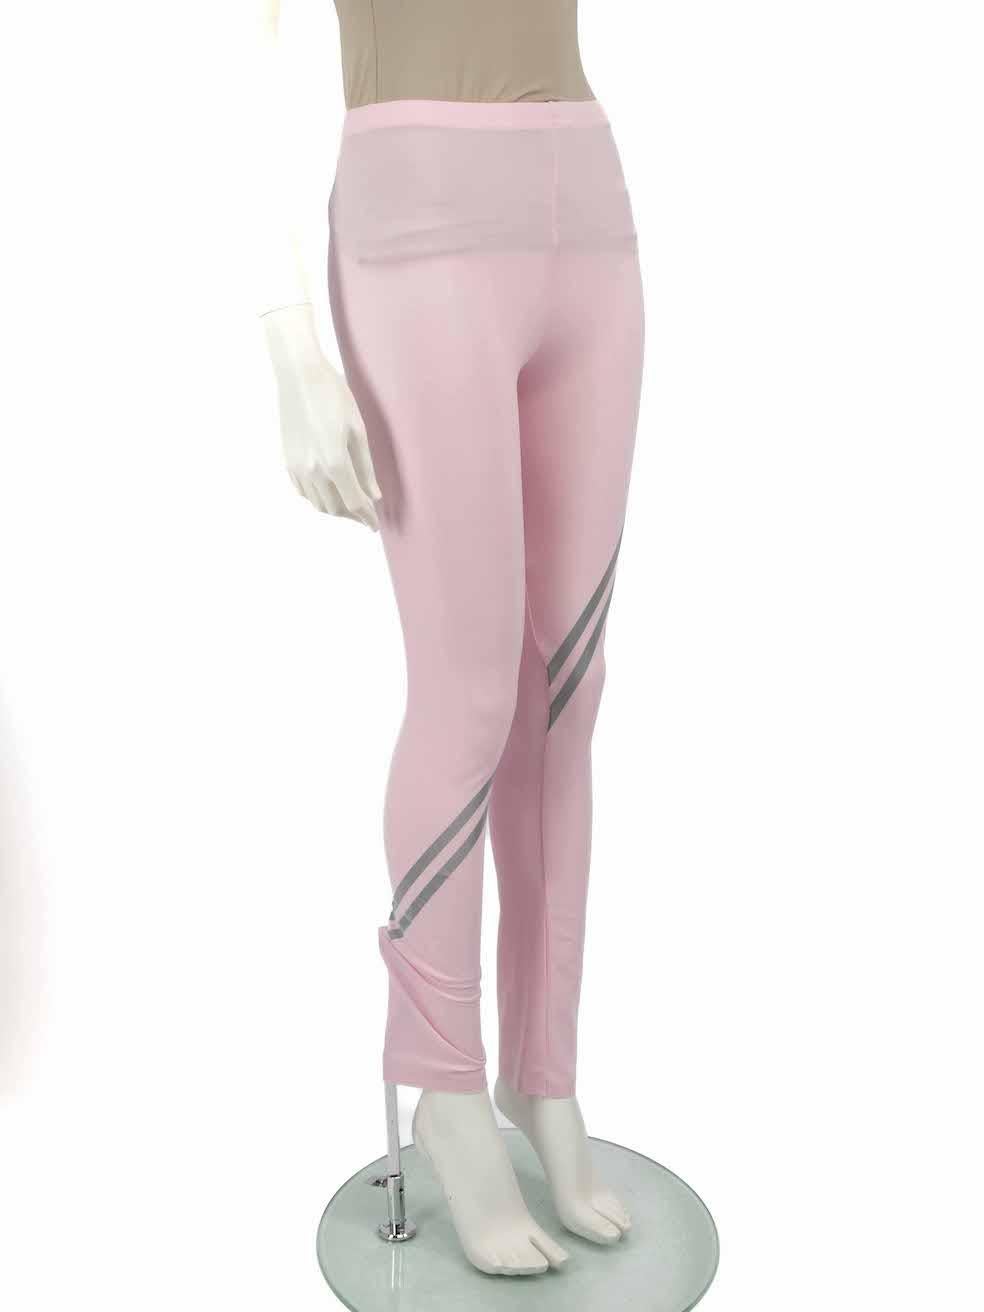 CONDITION is Very good. Minimal wear to leggings is evident. Minimal wear to front left side where there is a small mark to the thigh area on this used Loewe designer resale item.
 
 
 
 Details
 
 
 Pink
 
 Cotton
 
 Leggings
 
 High rise
 
